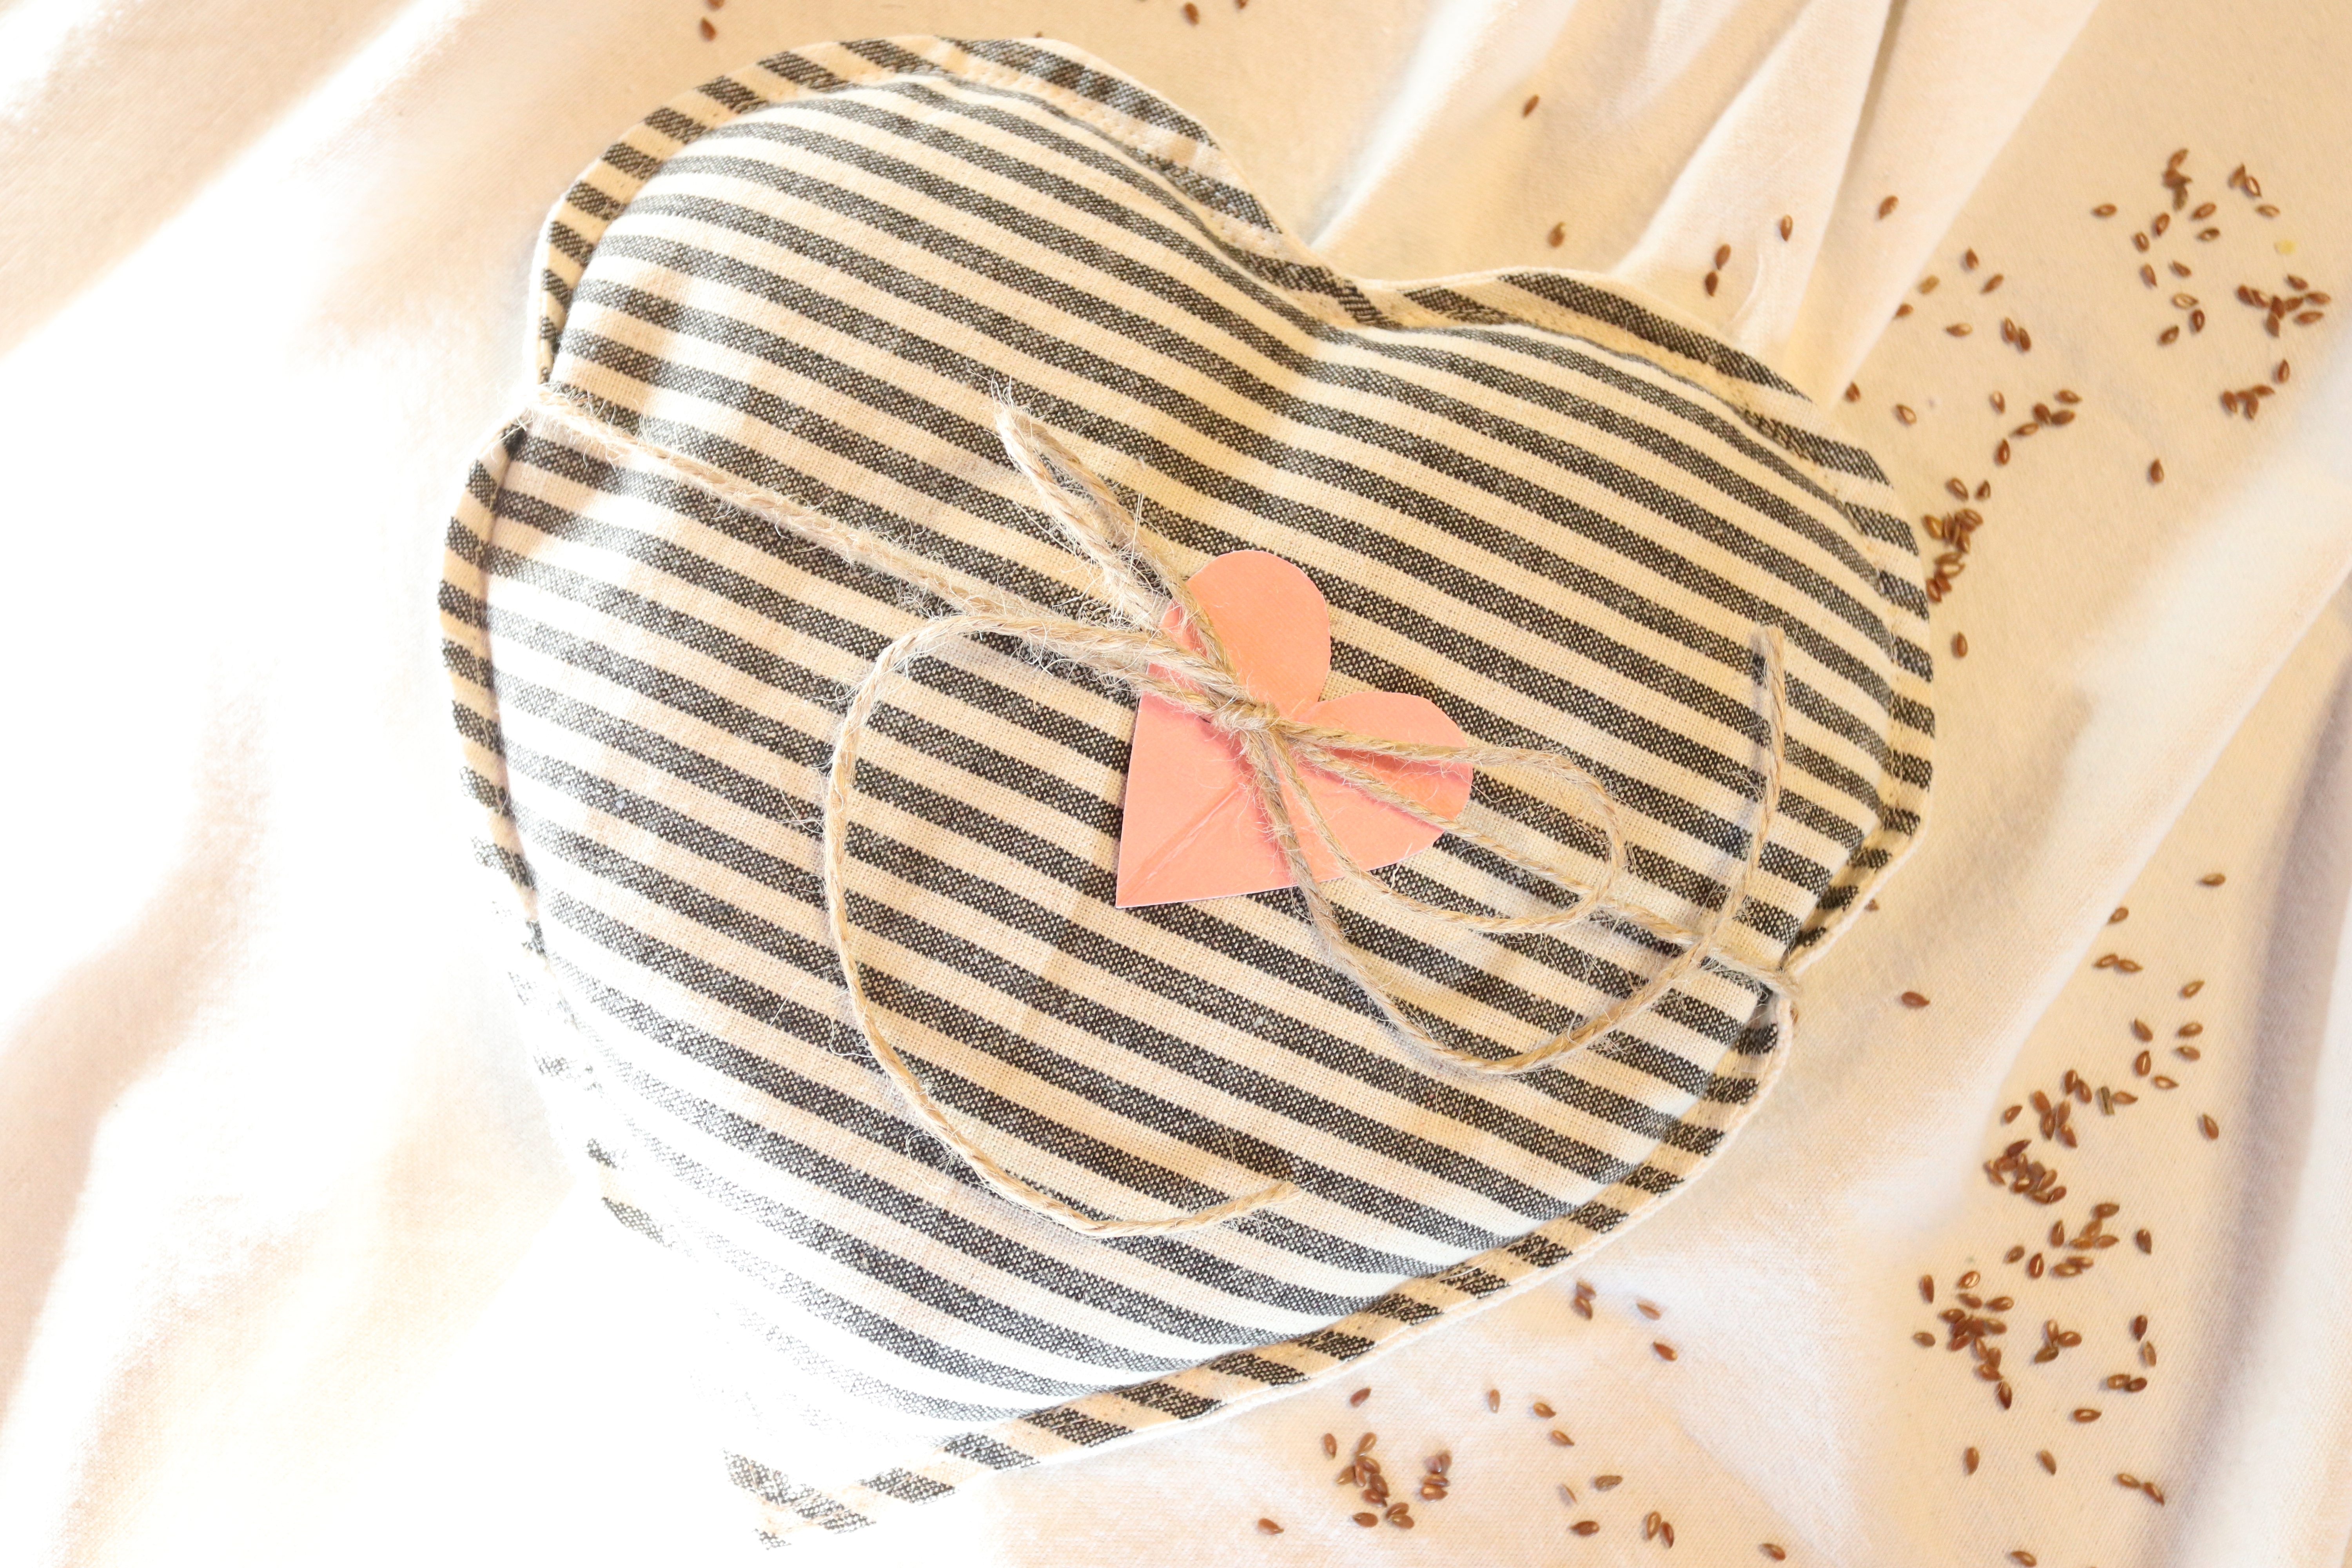 DIY Valentines Gift. How to make a reusable heat pack. Homemade valentines gift. Quick and easy gift idea. DIY gift ideas. #homemadeonourhomestead #handmadehome #DIYgiftideas #howtomakeareusableheatingpad